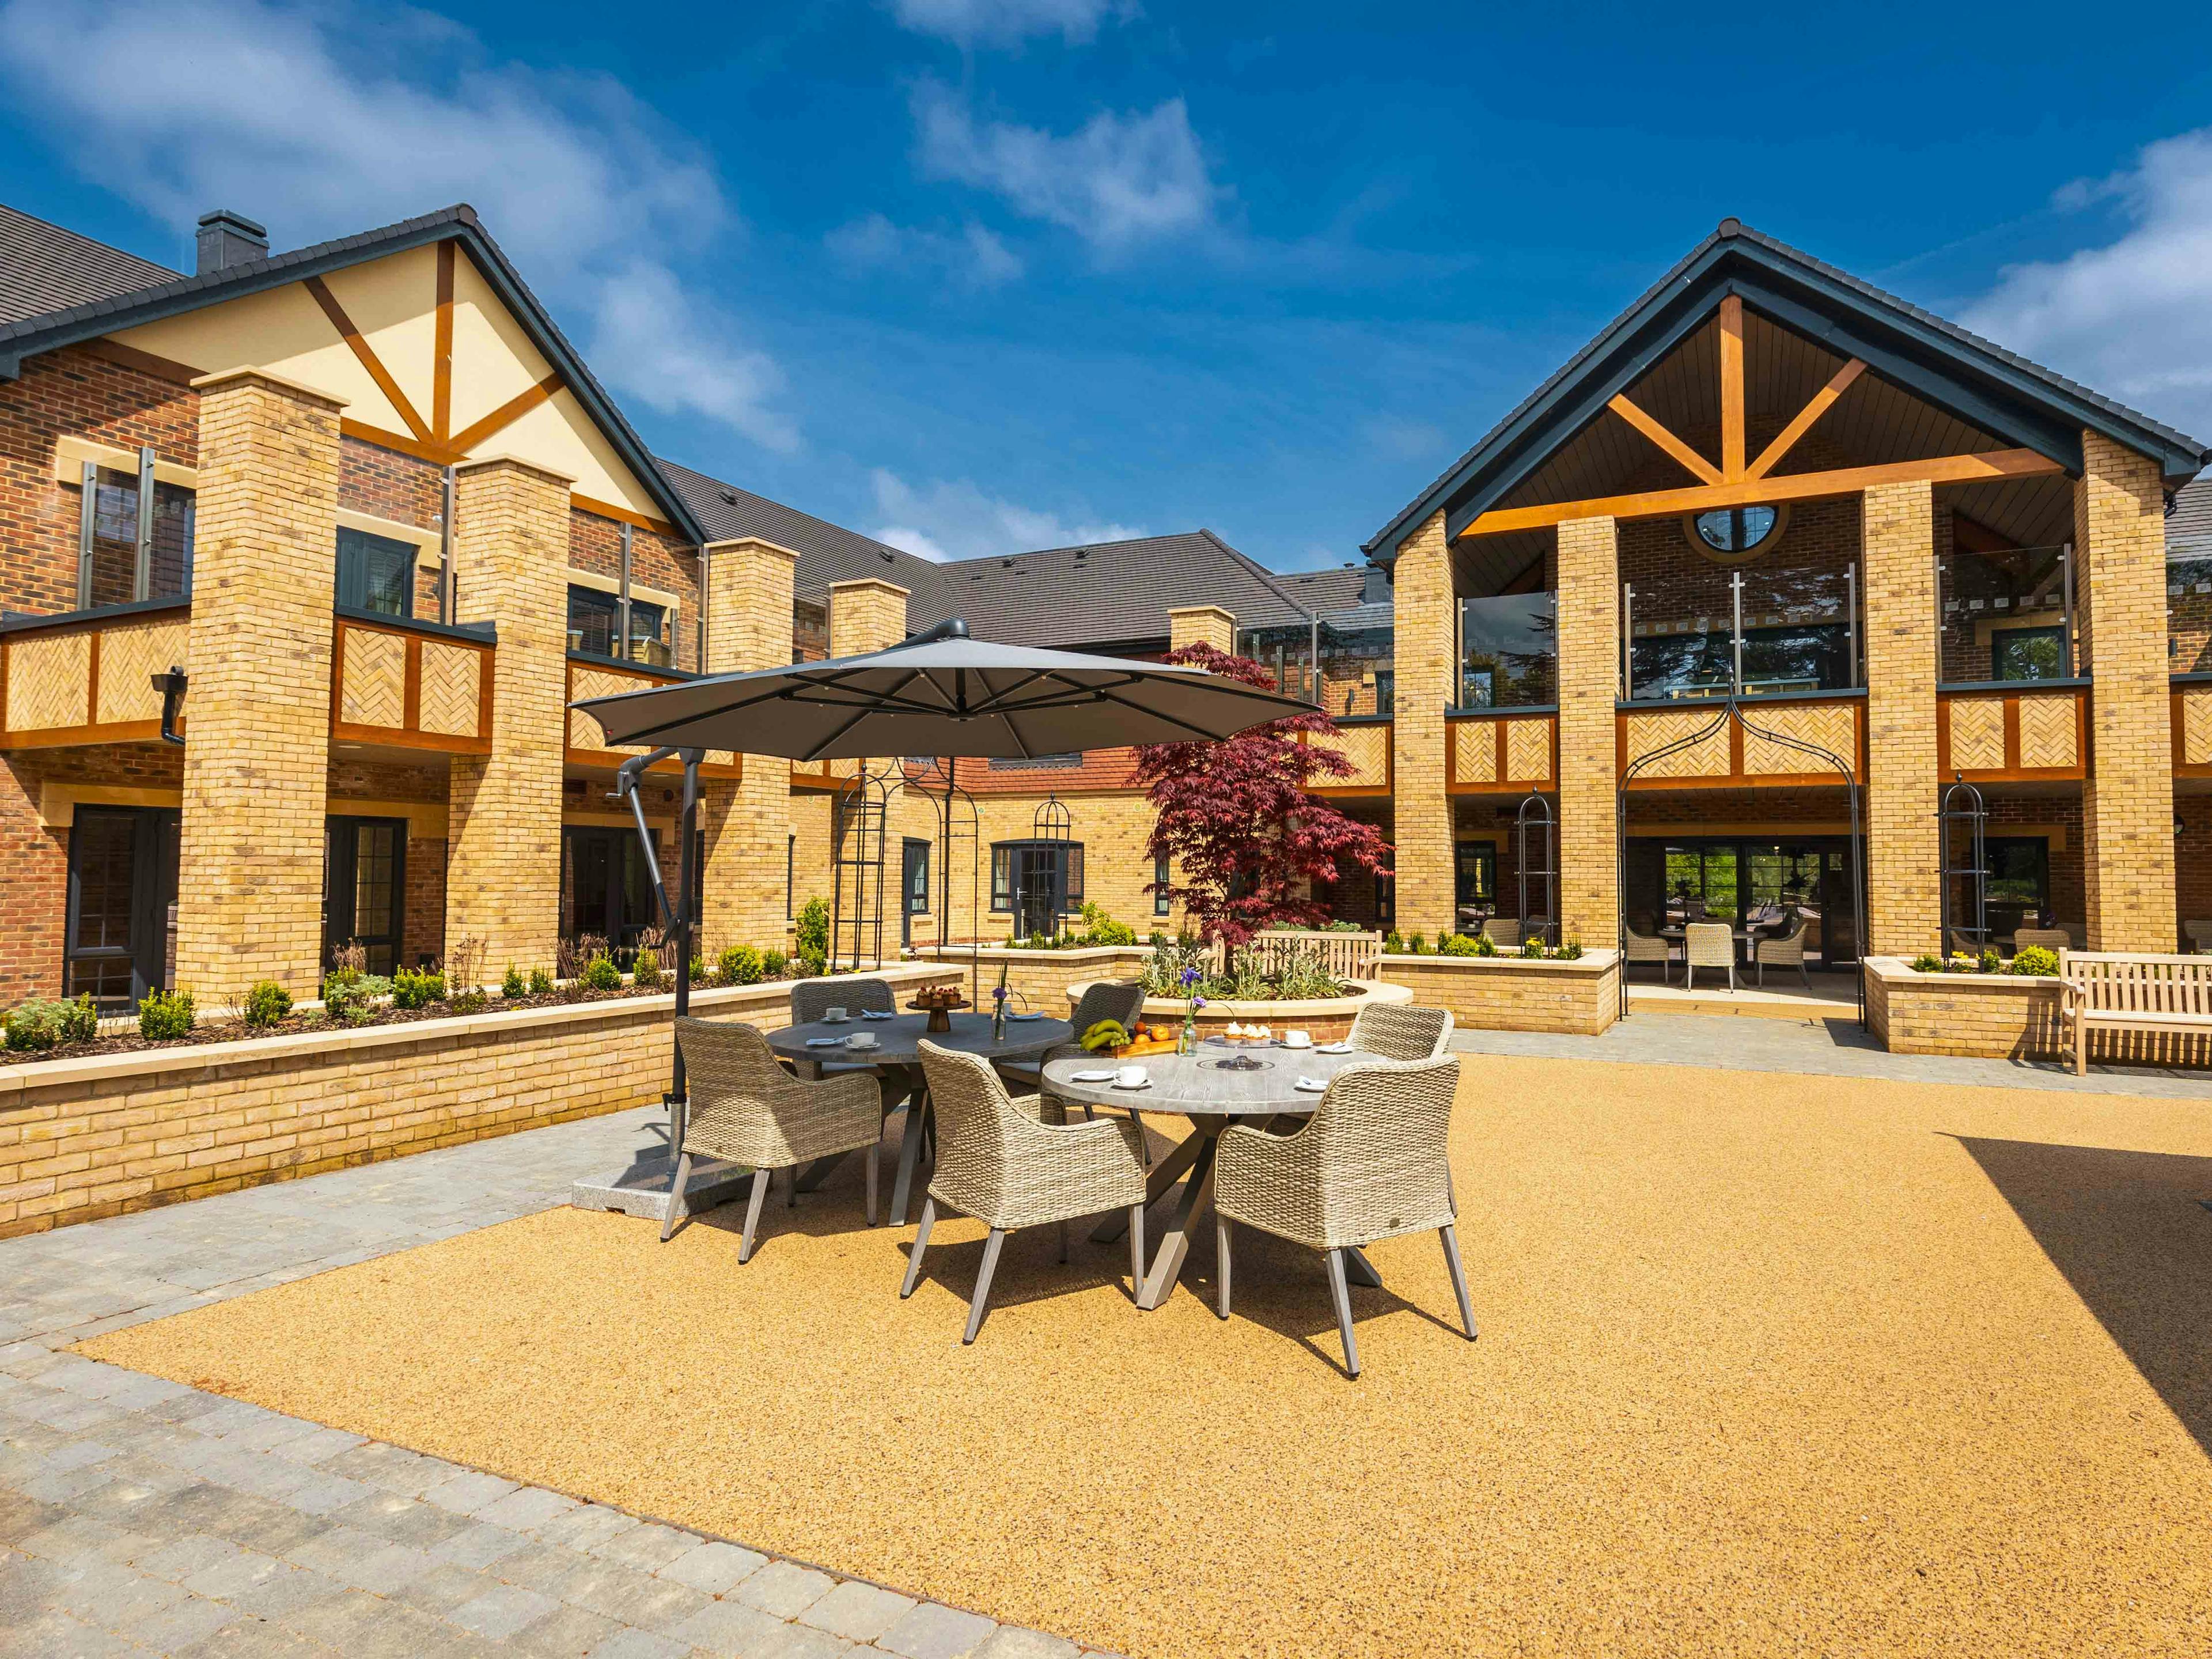 Iris Court Care Home in Hitchin